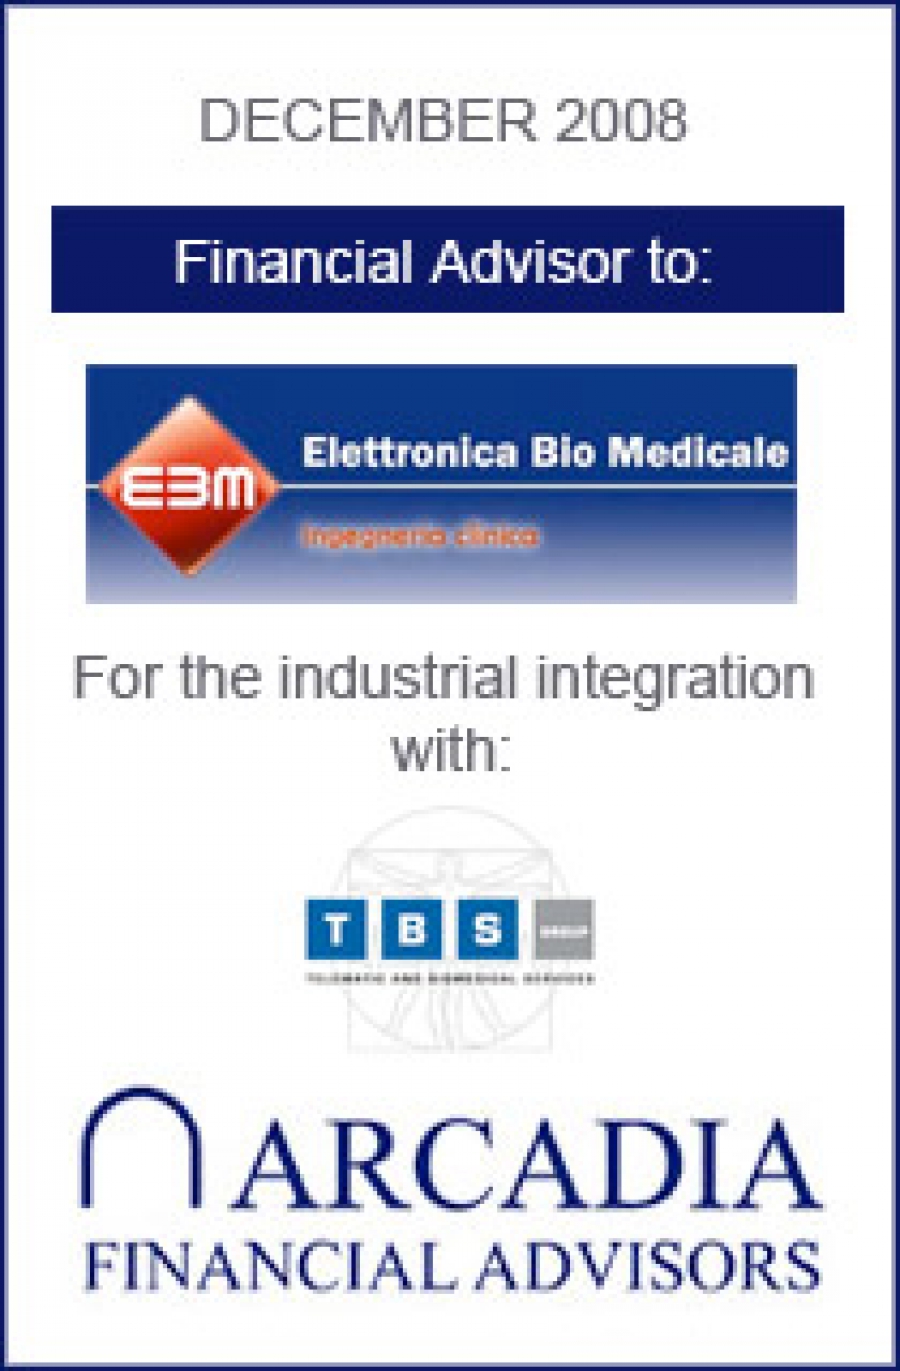 Transaction completed with Elettronica Bio Medicale